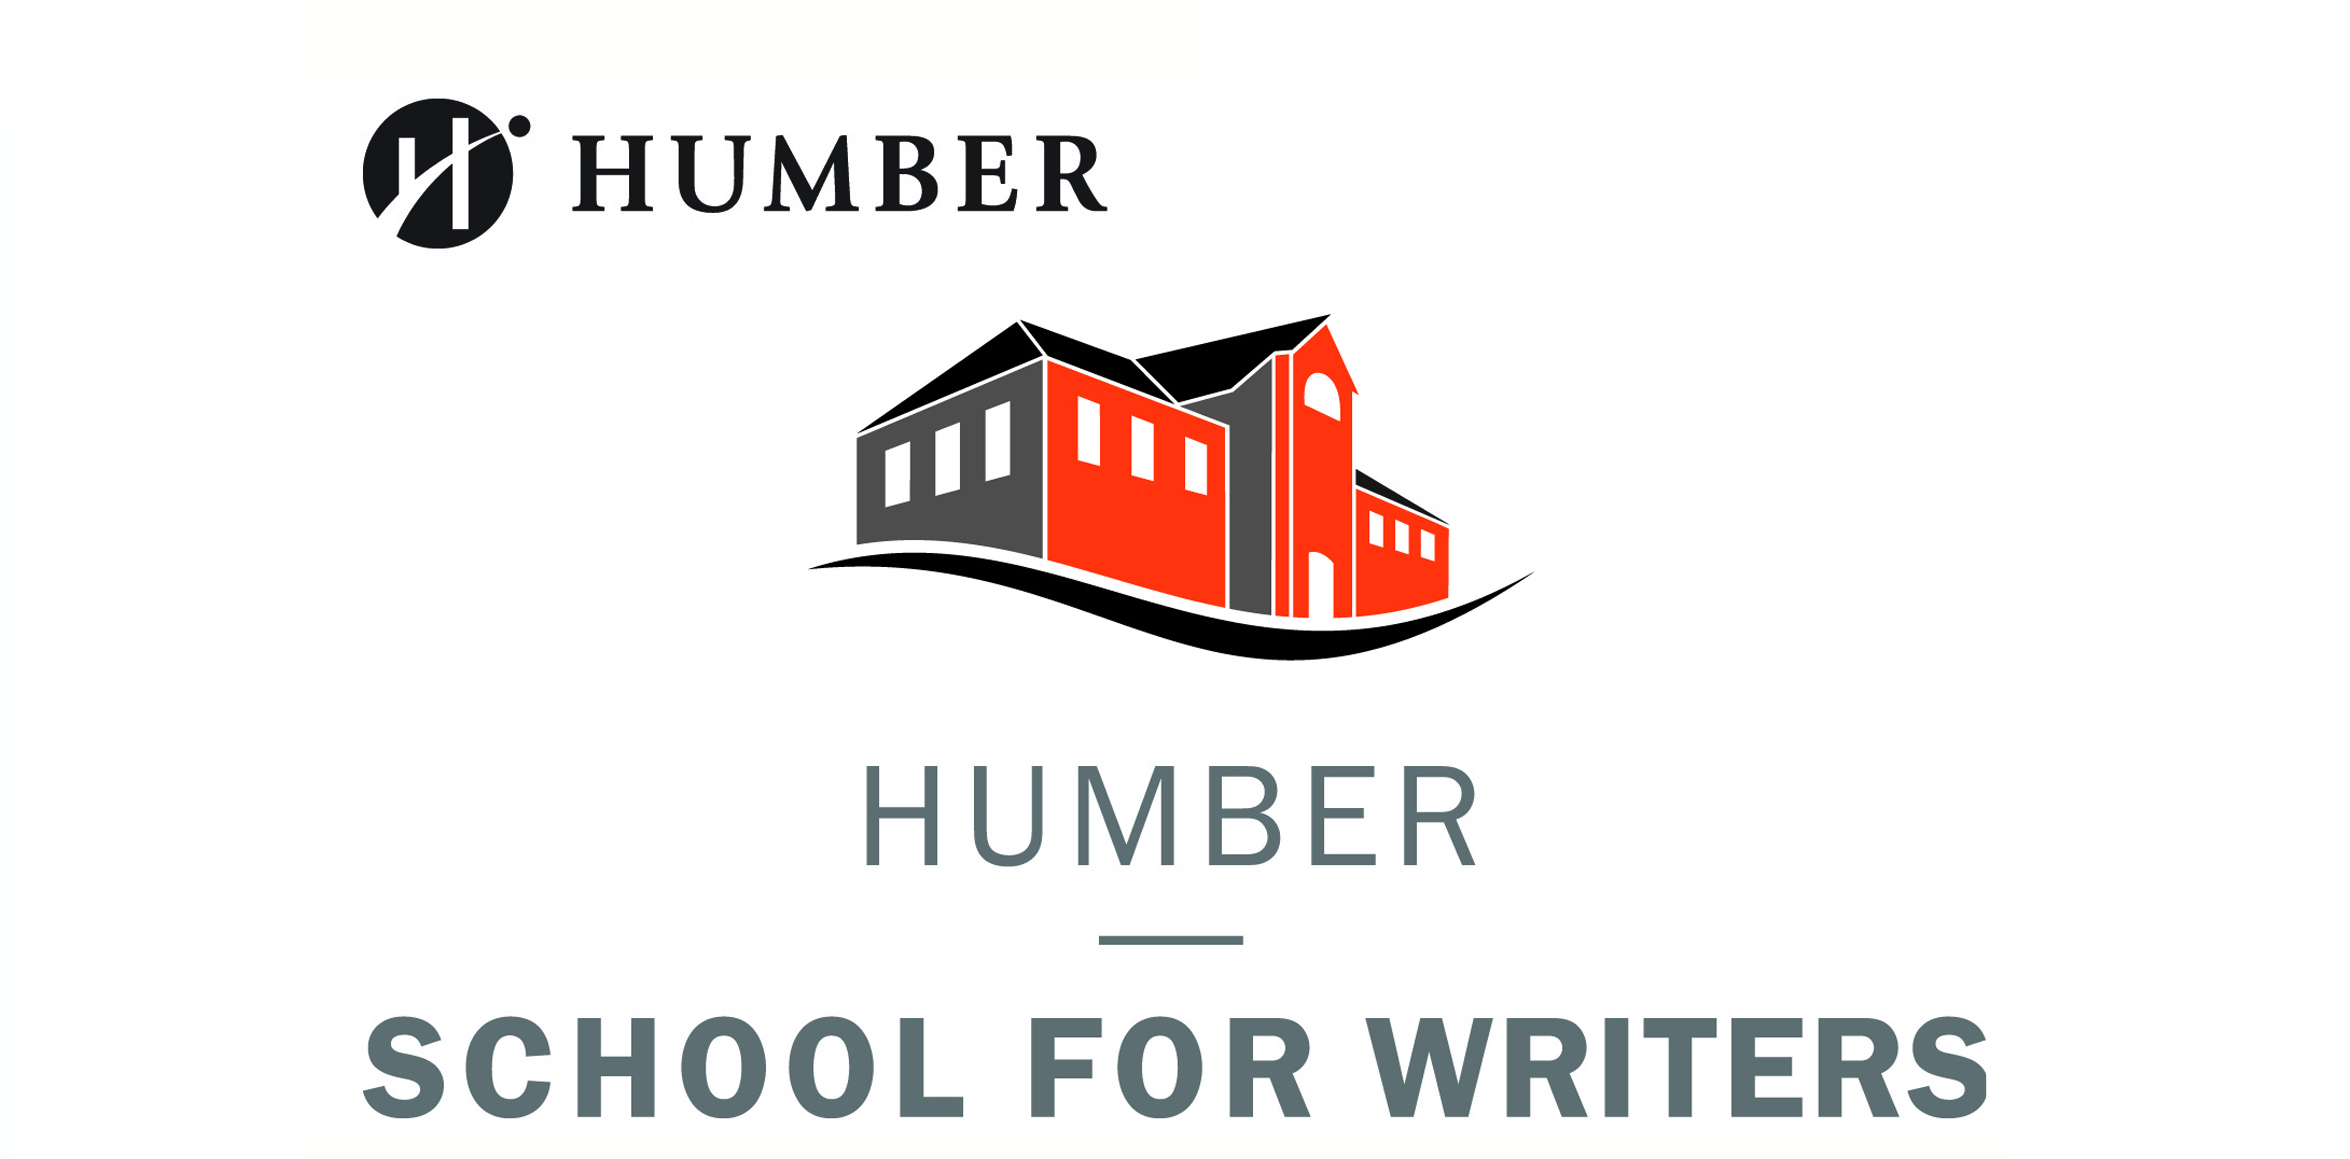 Humber School for Writers